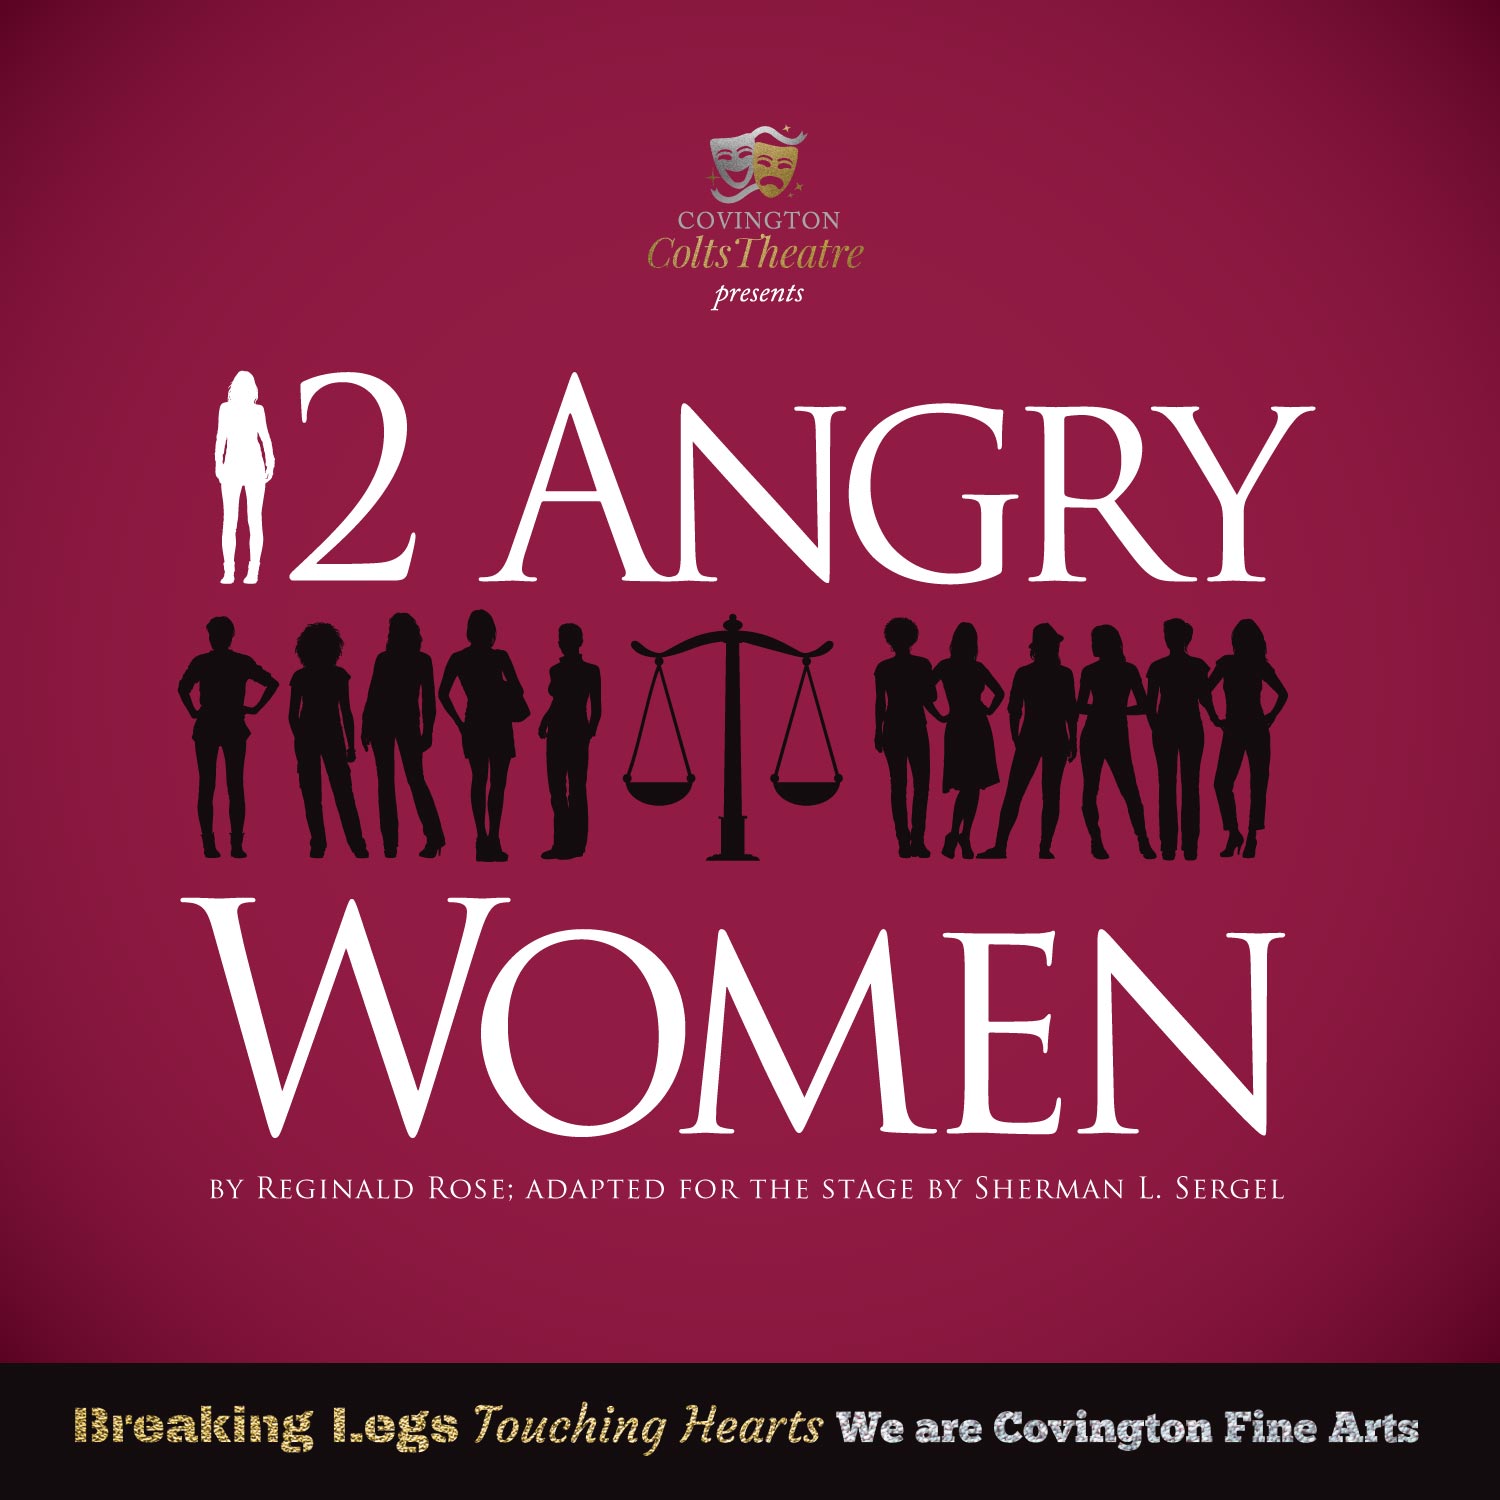 12 Angry Women